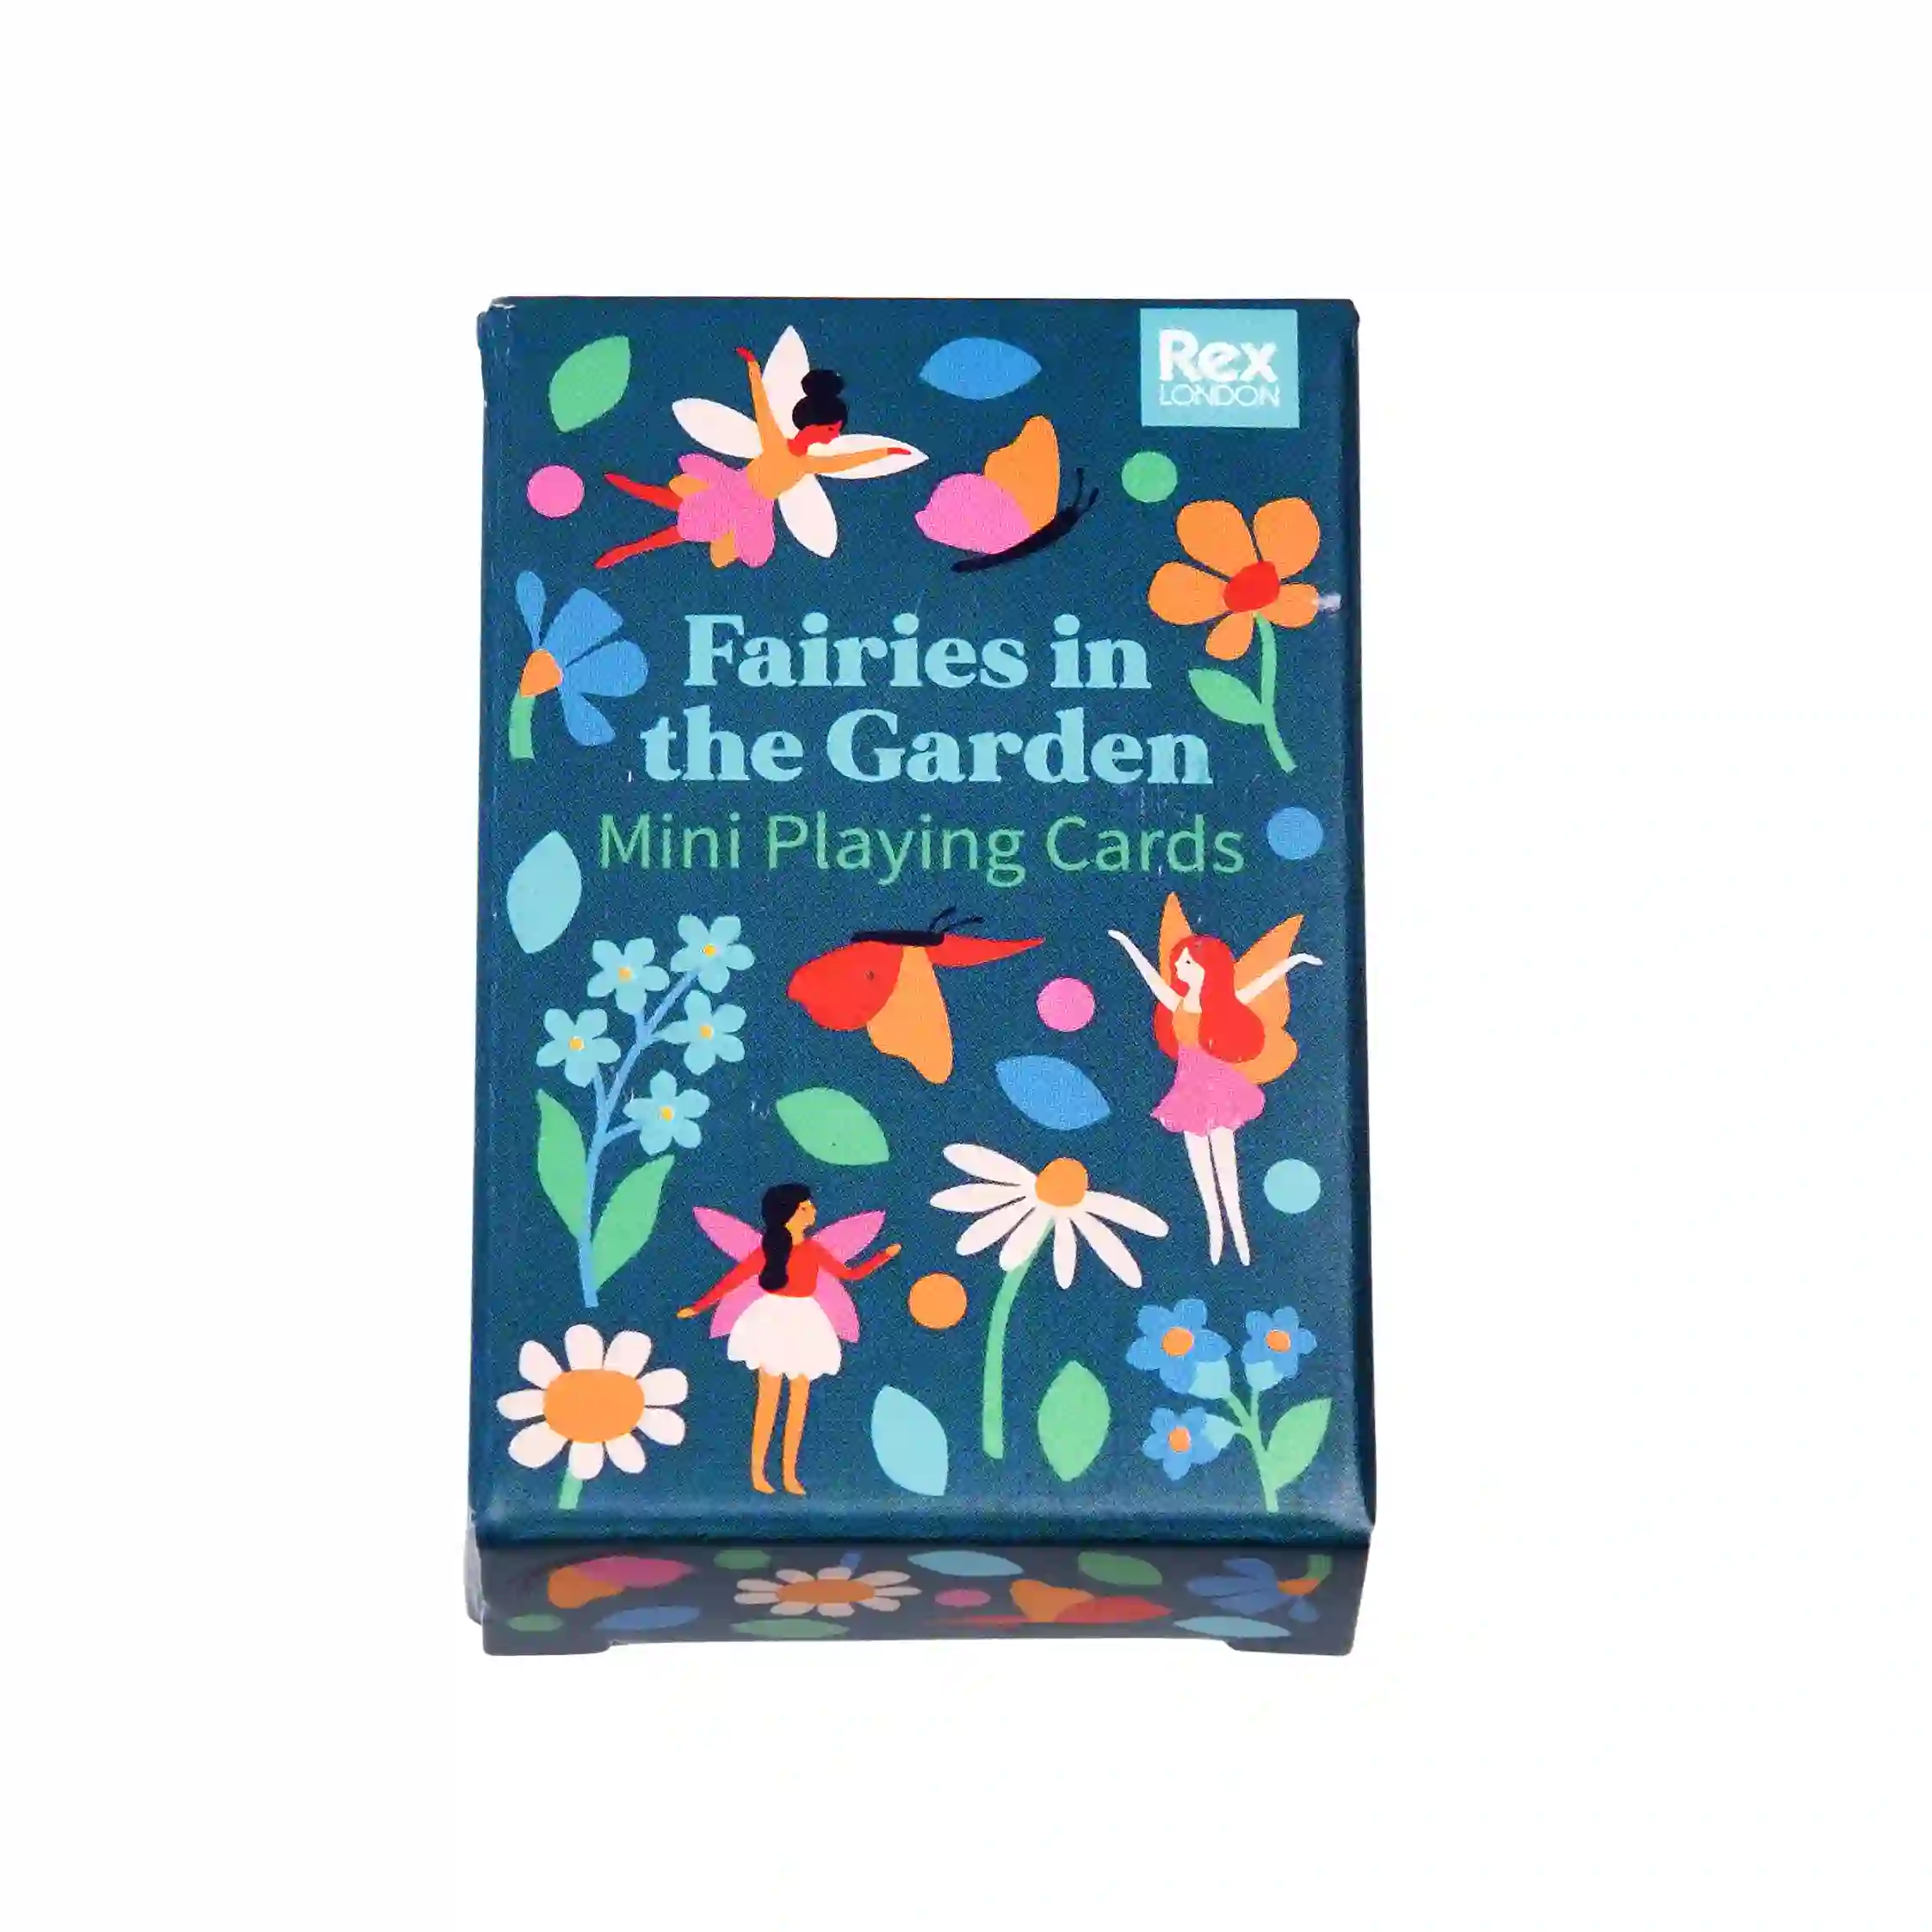 mini playing cards - fairies in the garden